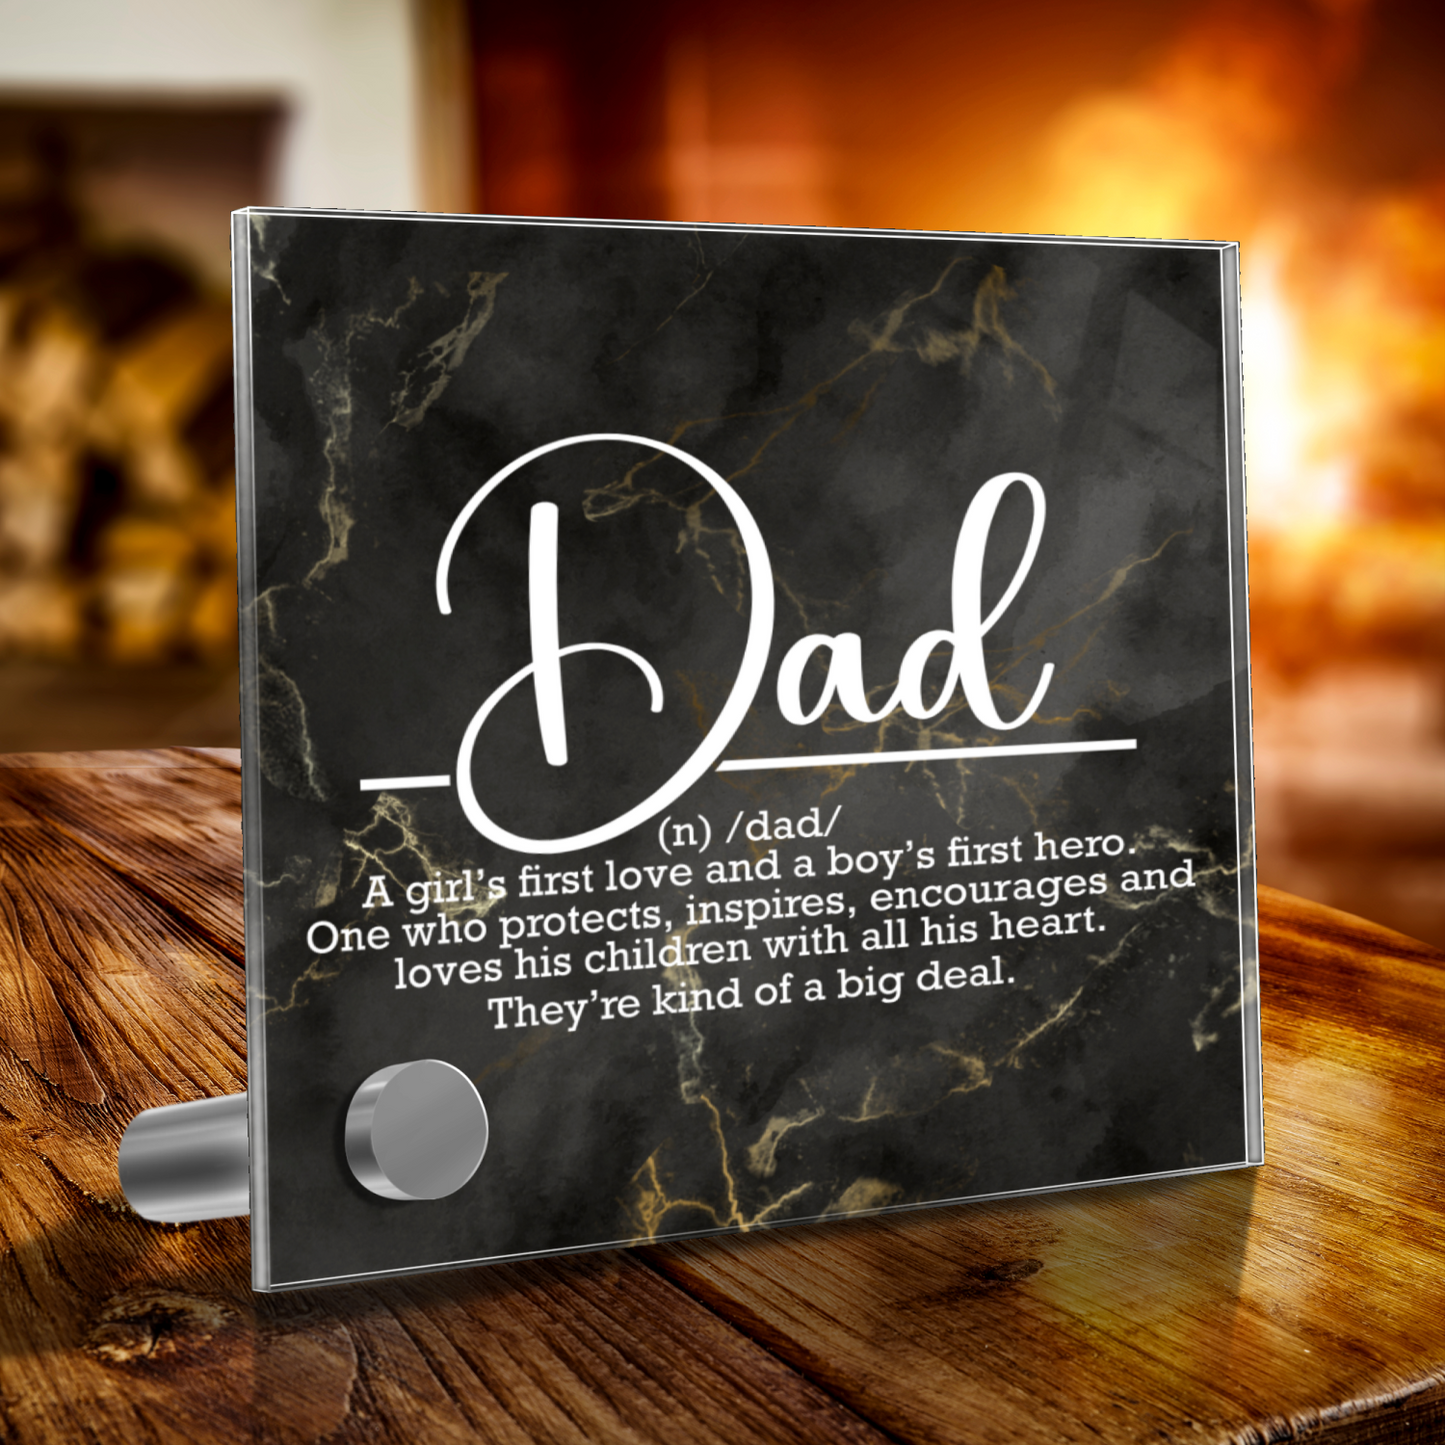 Dad Definition Father's Day Watch Gift  With Message Plaque